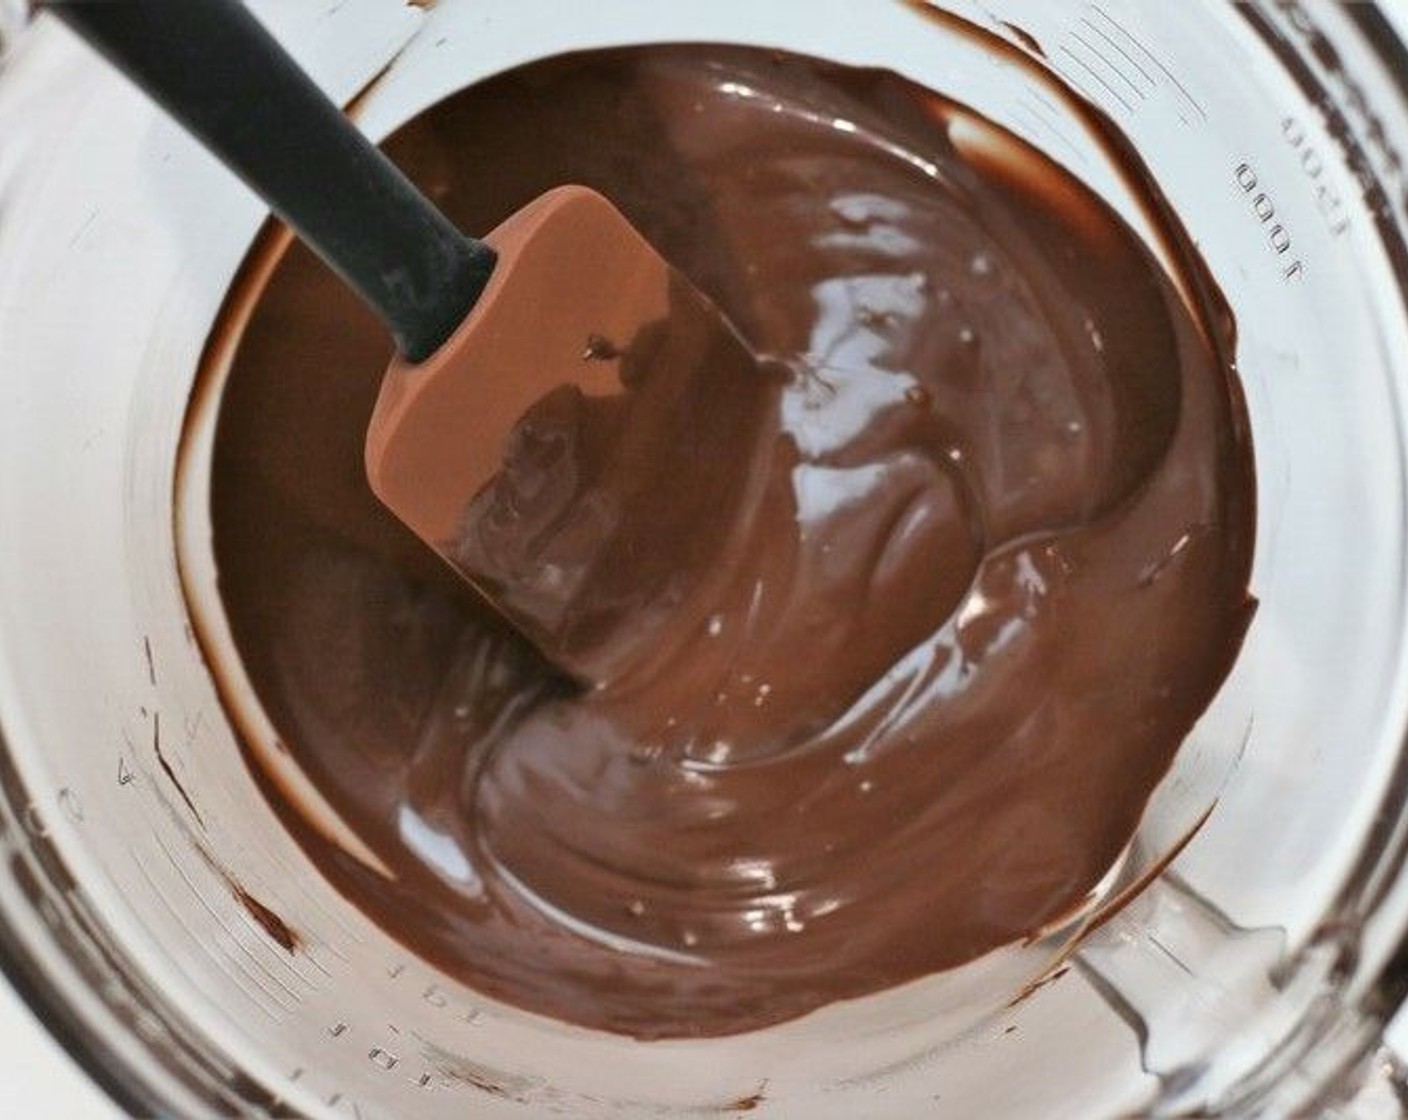 step 5 Break or chop Dark Chocolate (1/2 cup) into pieces and melt according to package directions (double boiler or microwave). Stir until melted and smooth.